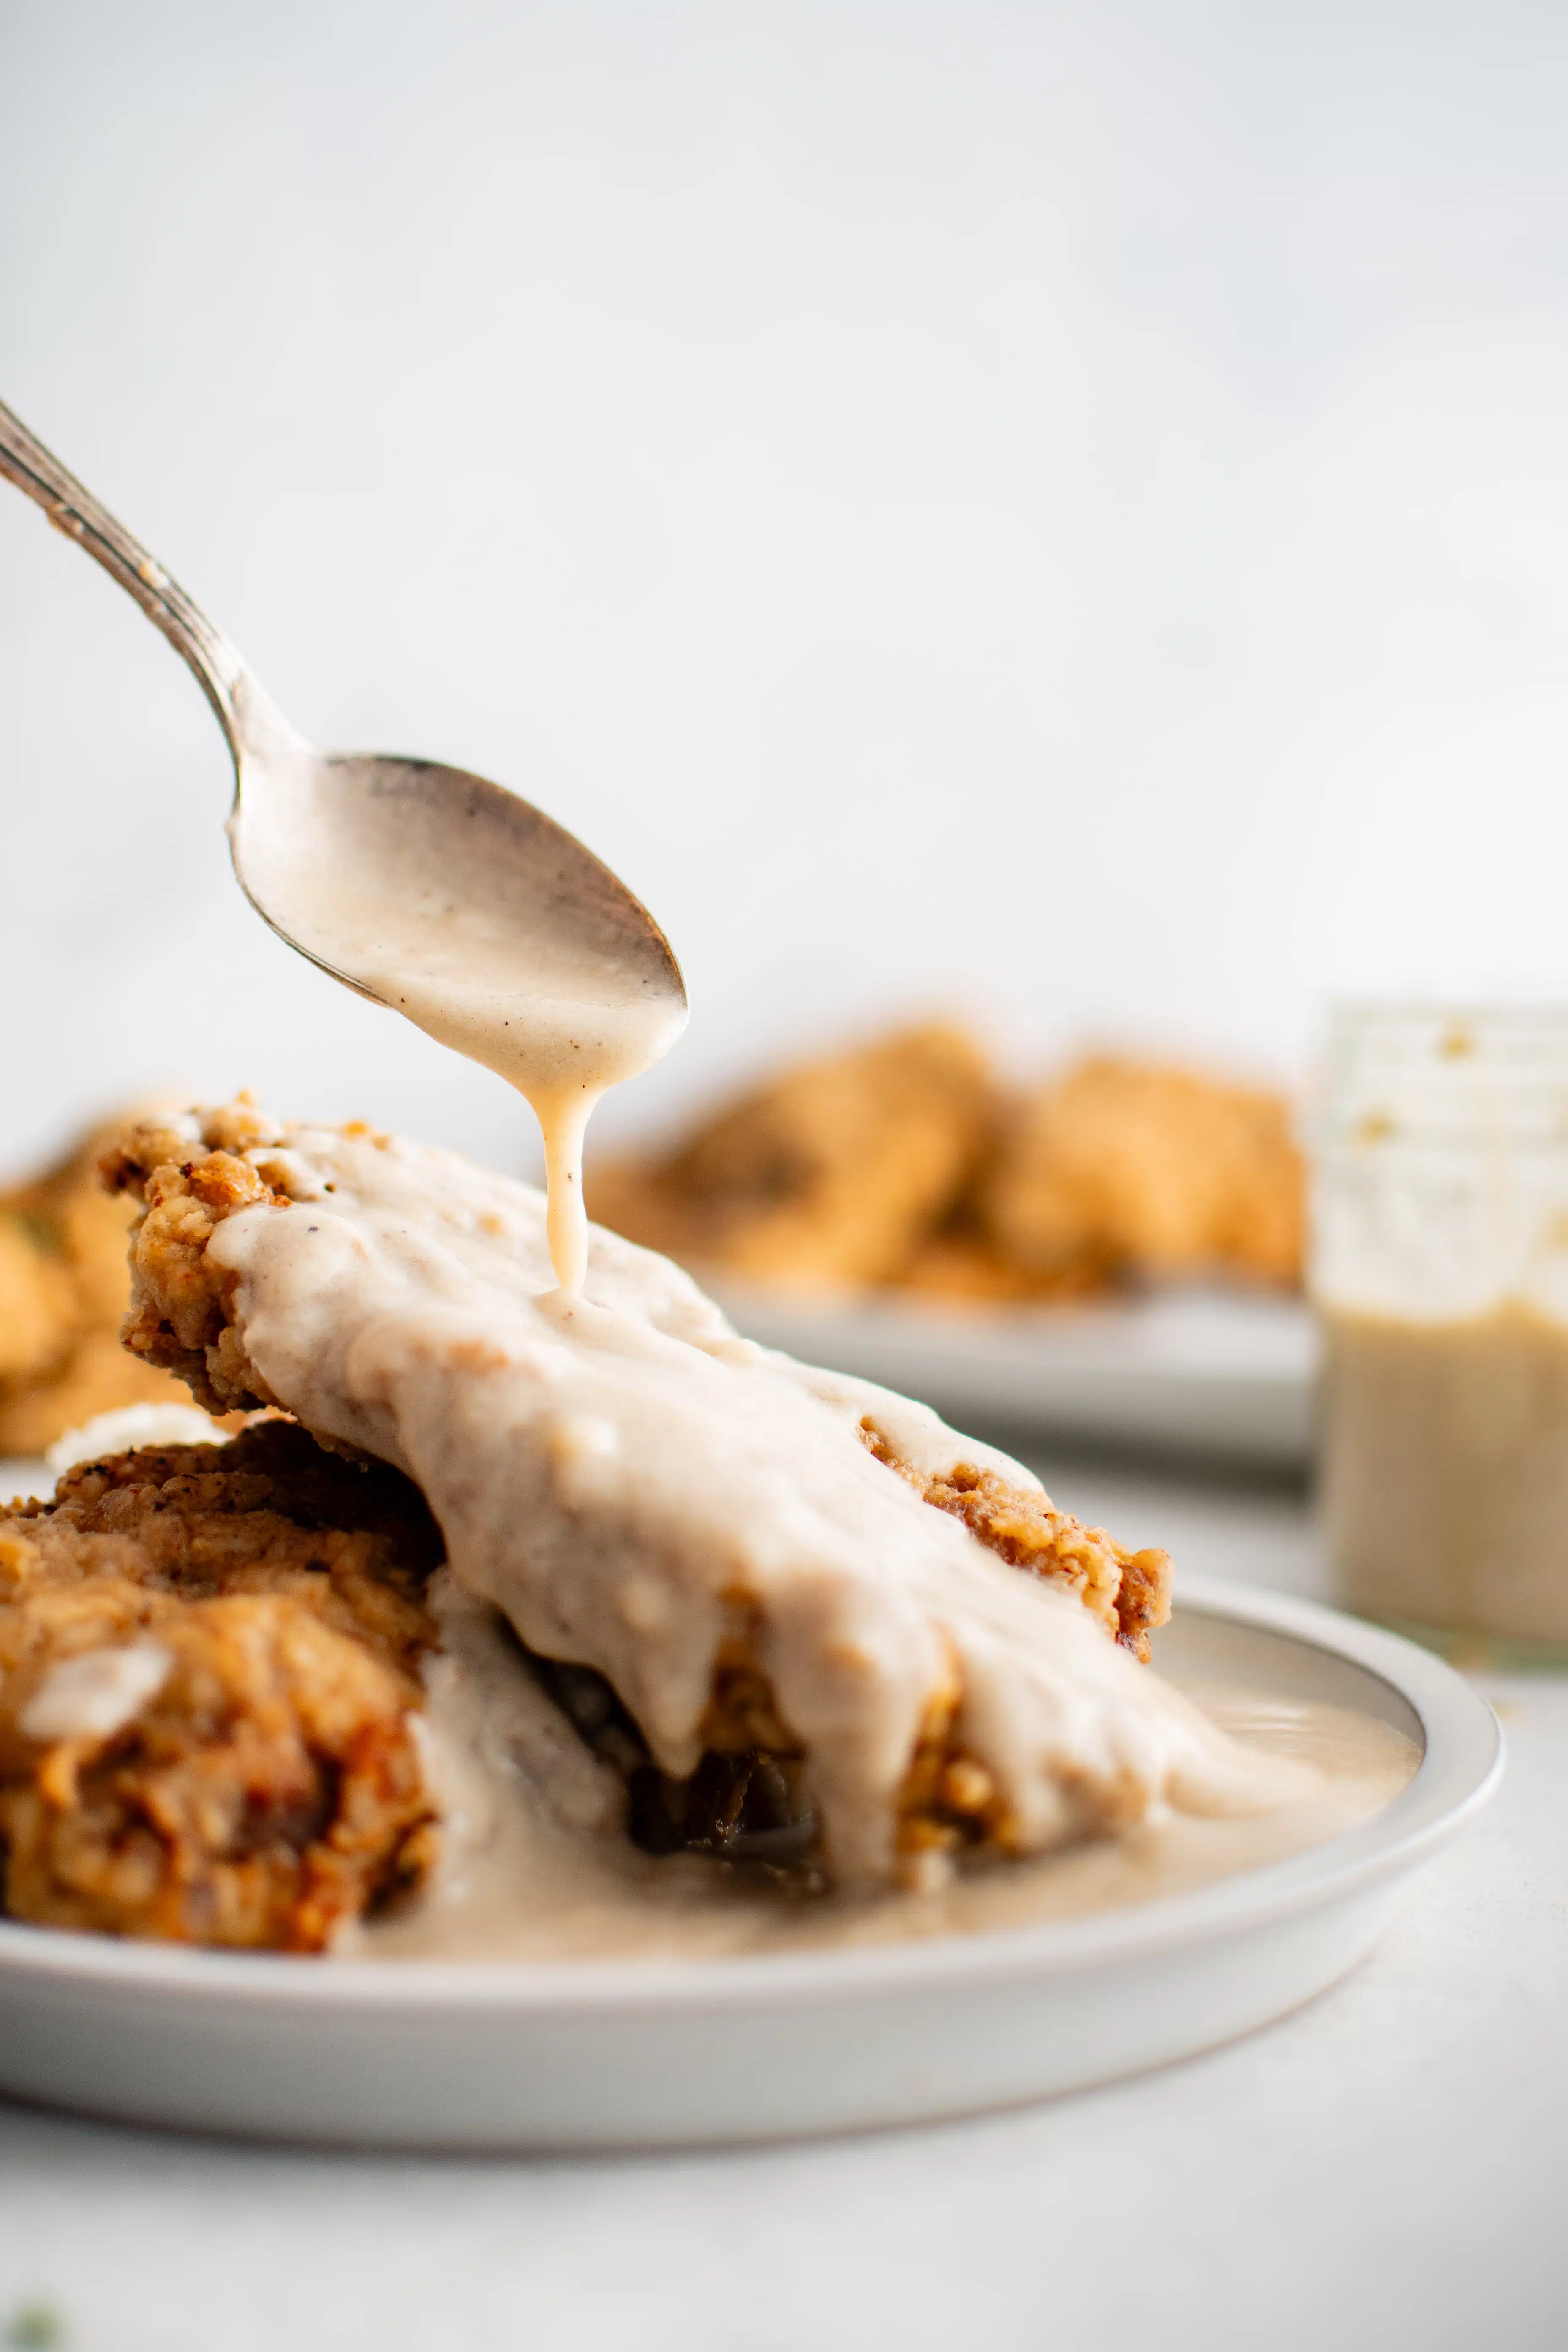 Spoon drizzling homemade creamy white gravy over two pieces of chicken fried steak on a white dinner plate.